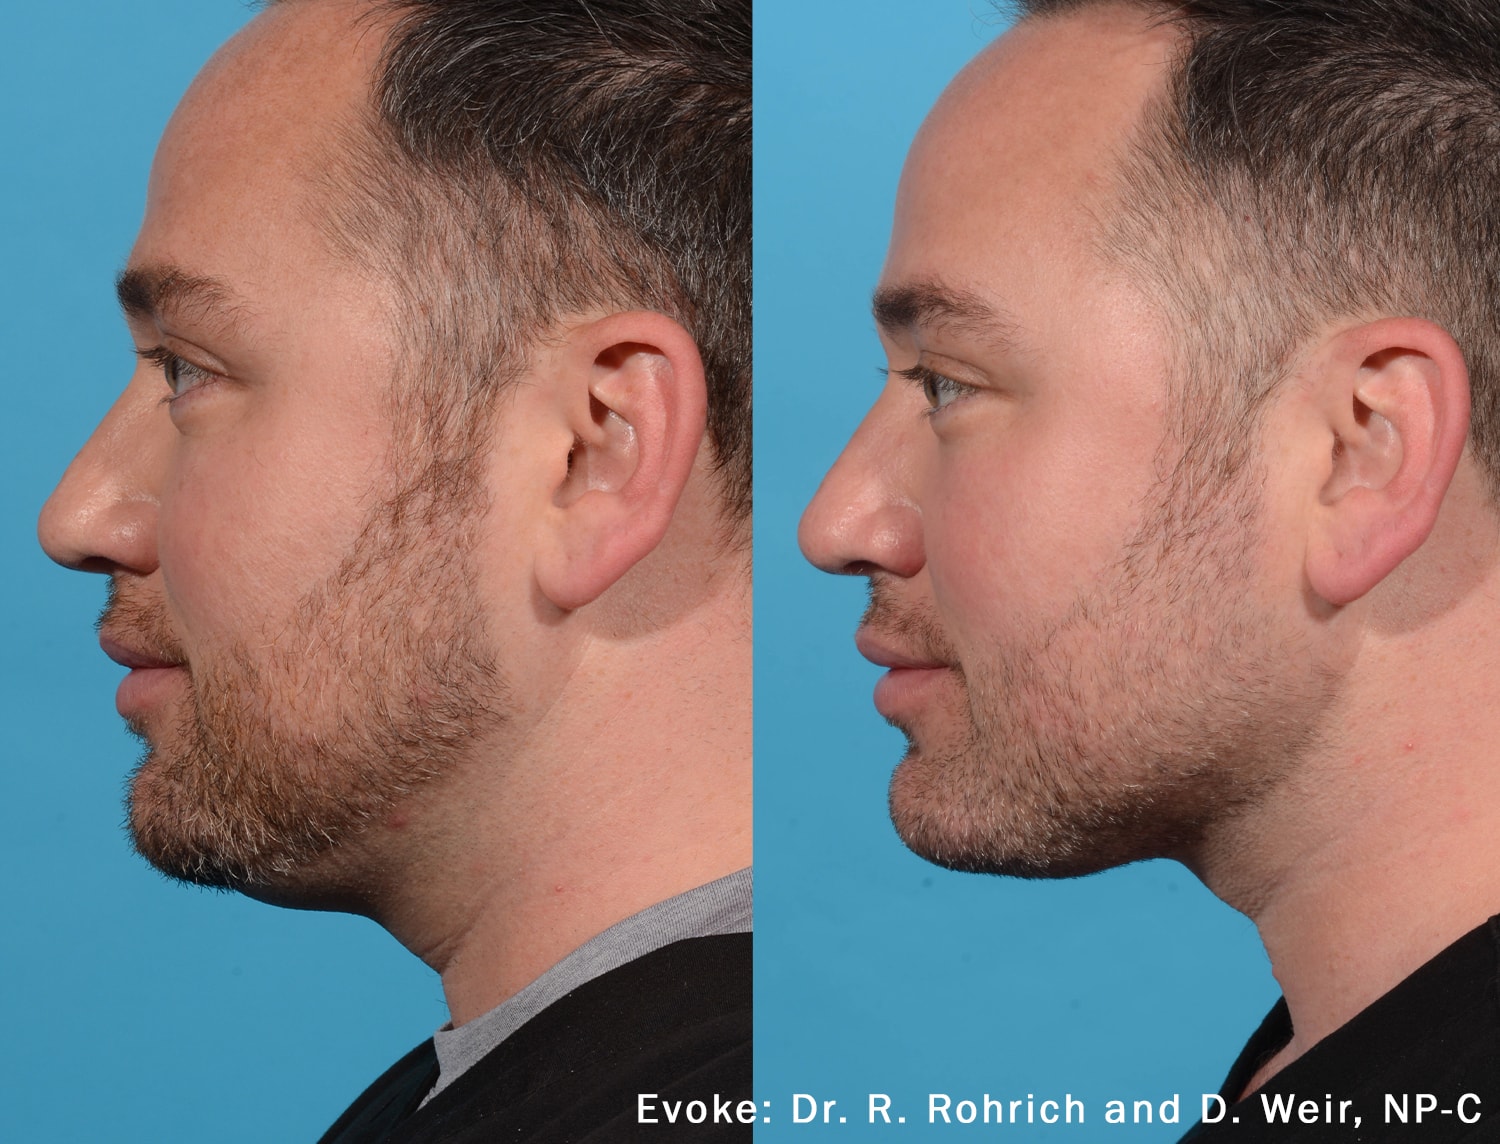 Before and After photos of Evoke treatments reducing fat and contouring a man’s neck, chin and jawline